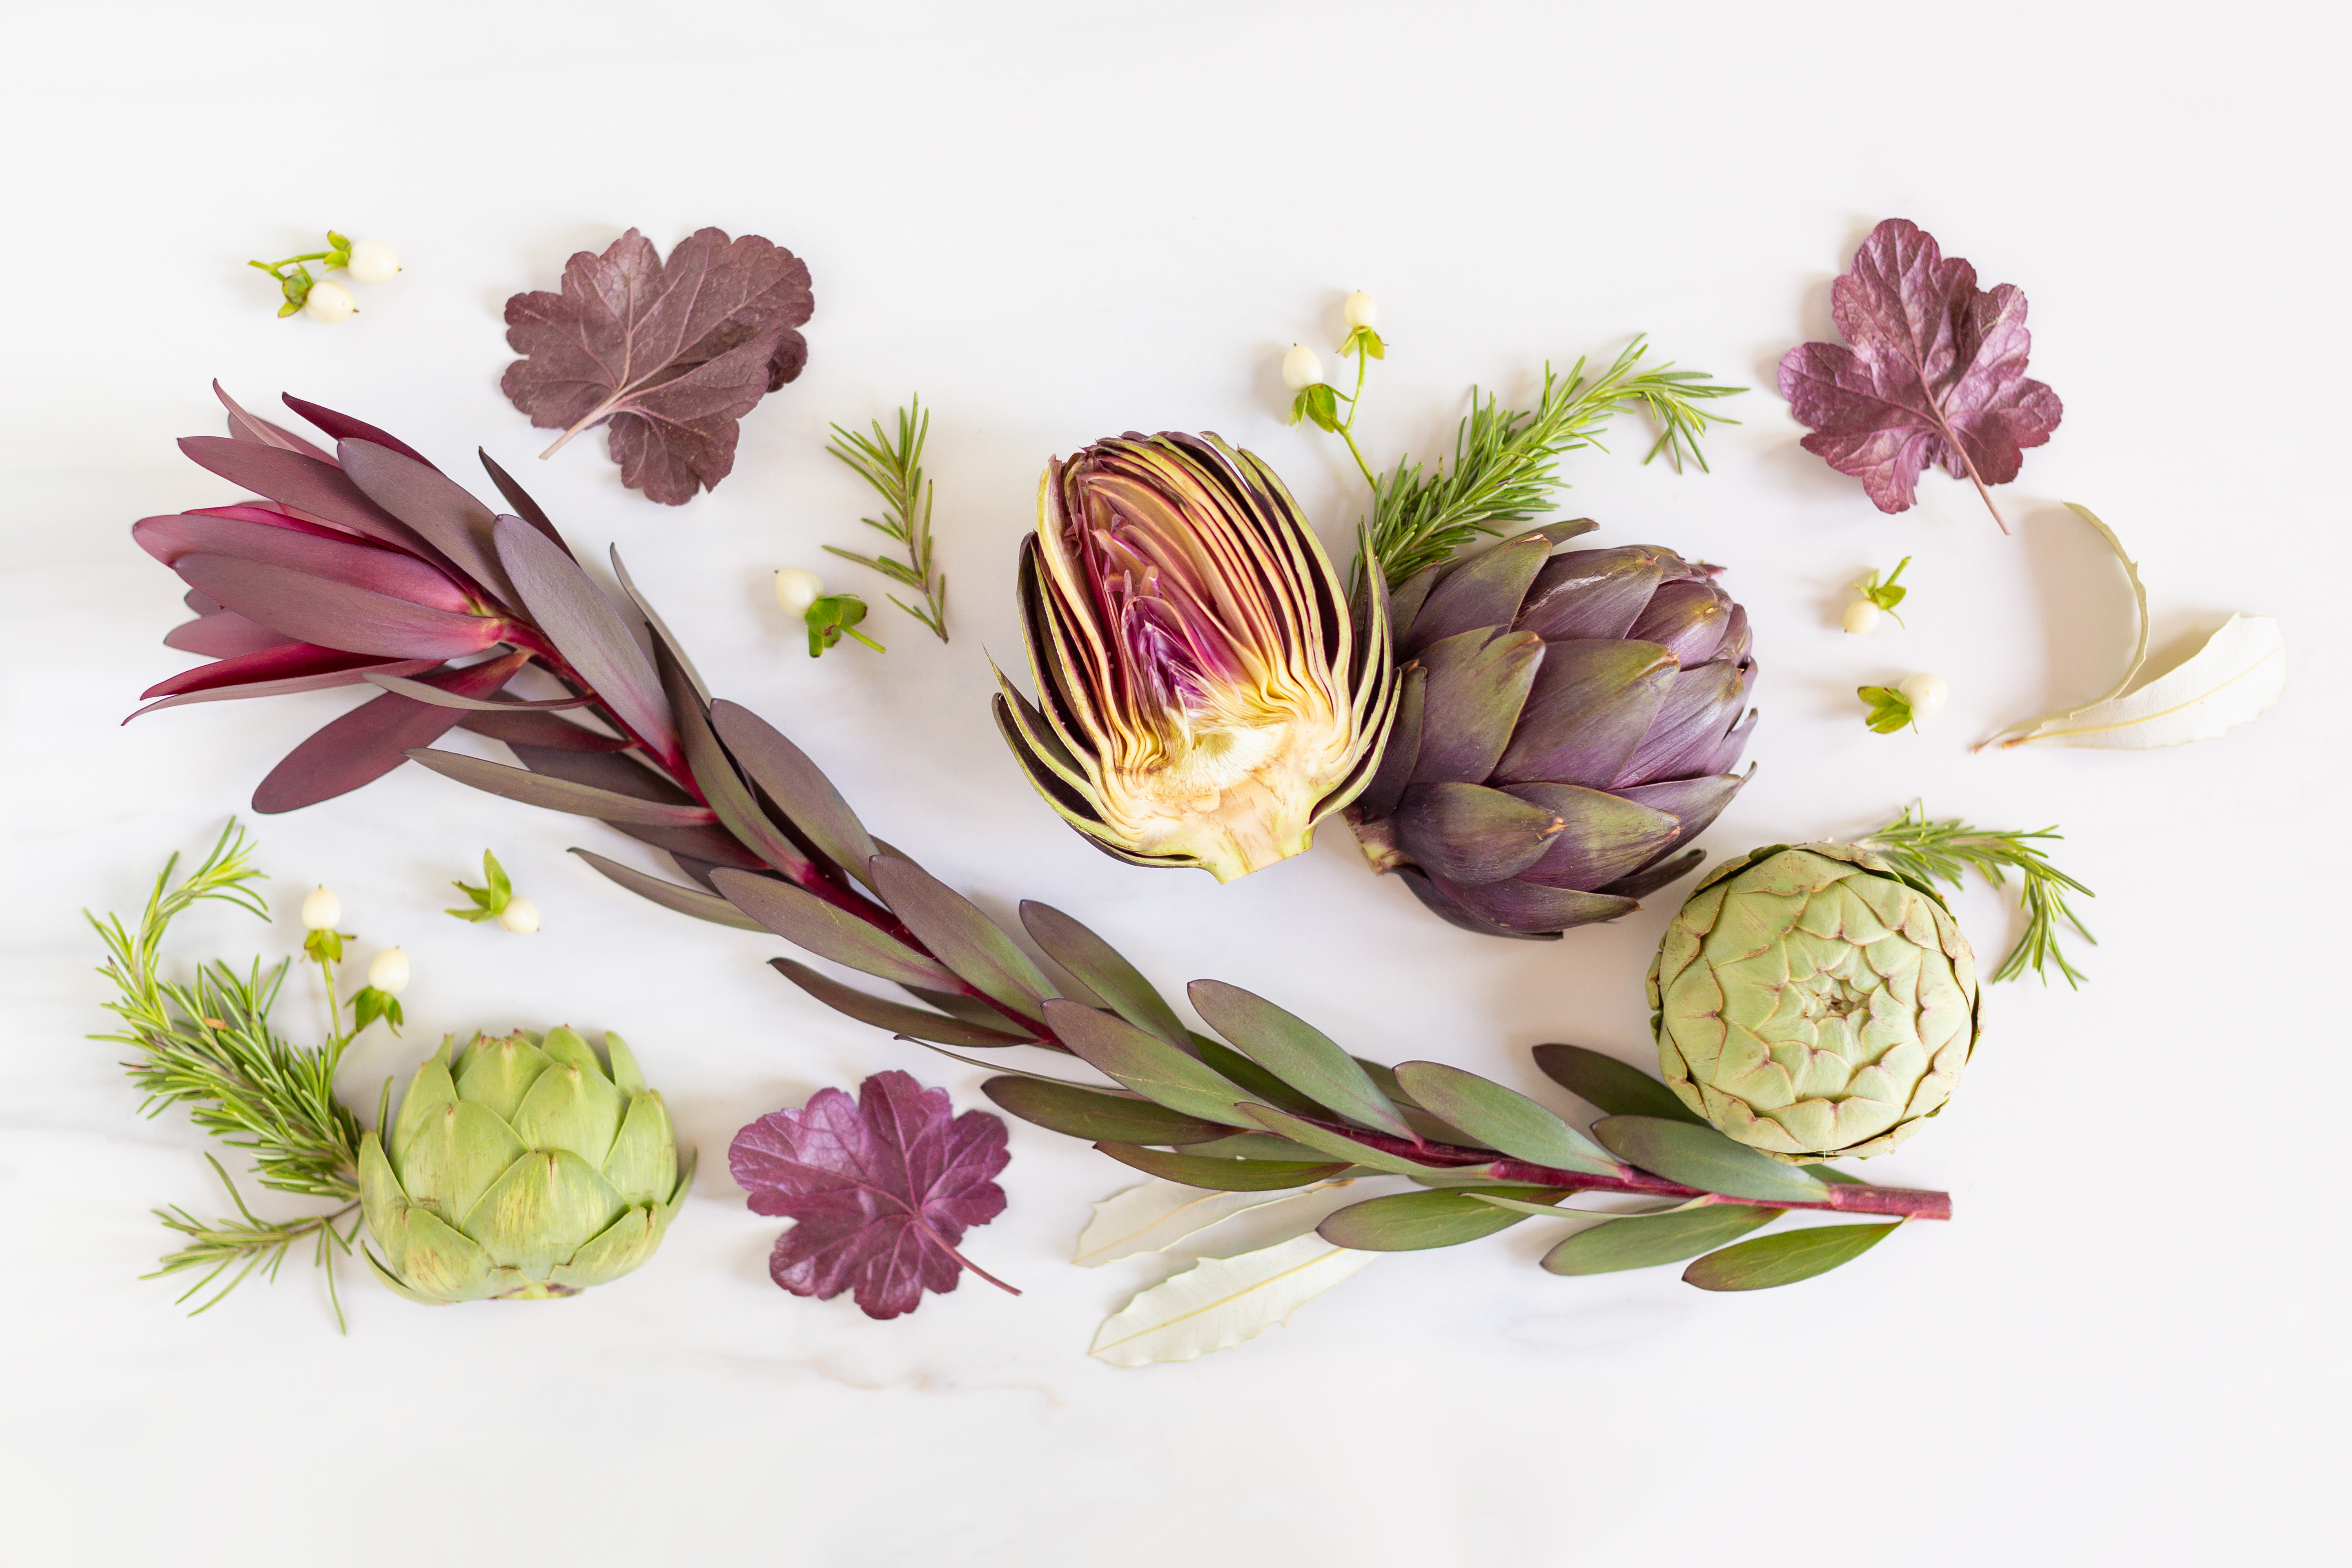 Digital Blooms August 2018 | Free Desktop Wallpapers for Spring and Summer with Artichokes, Rosemary, Berries and Quicksand Roses | Design 2 // JustineCelina.com x Rebecca Dawn Design